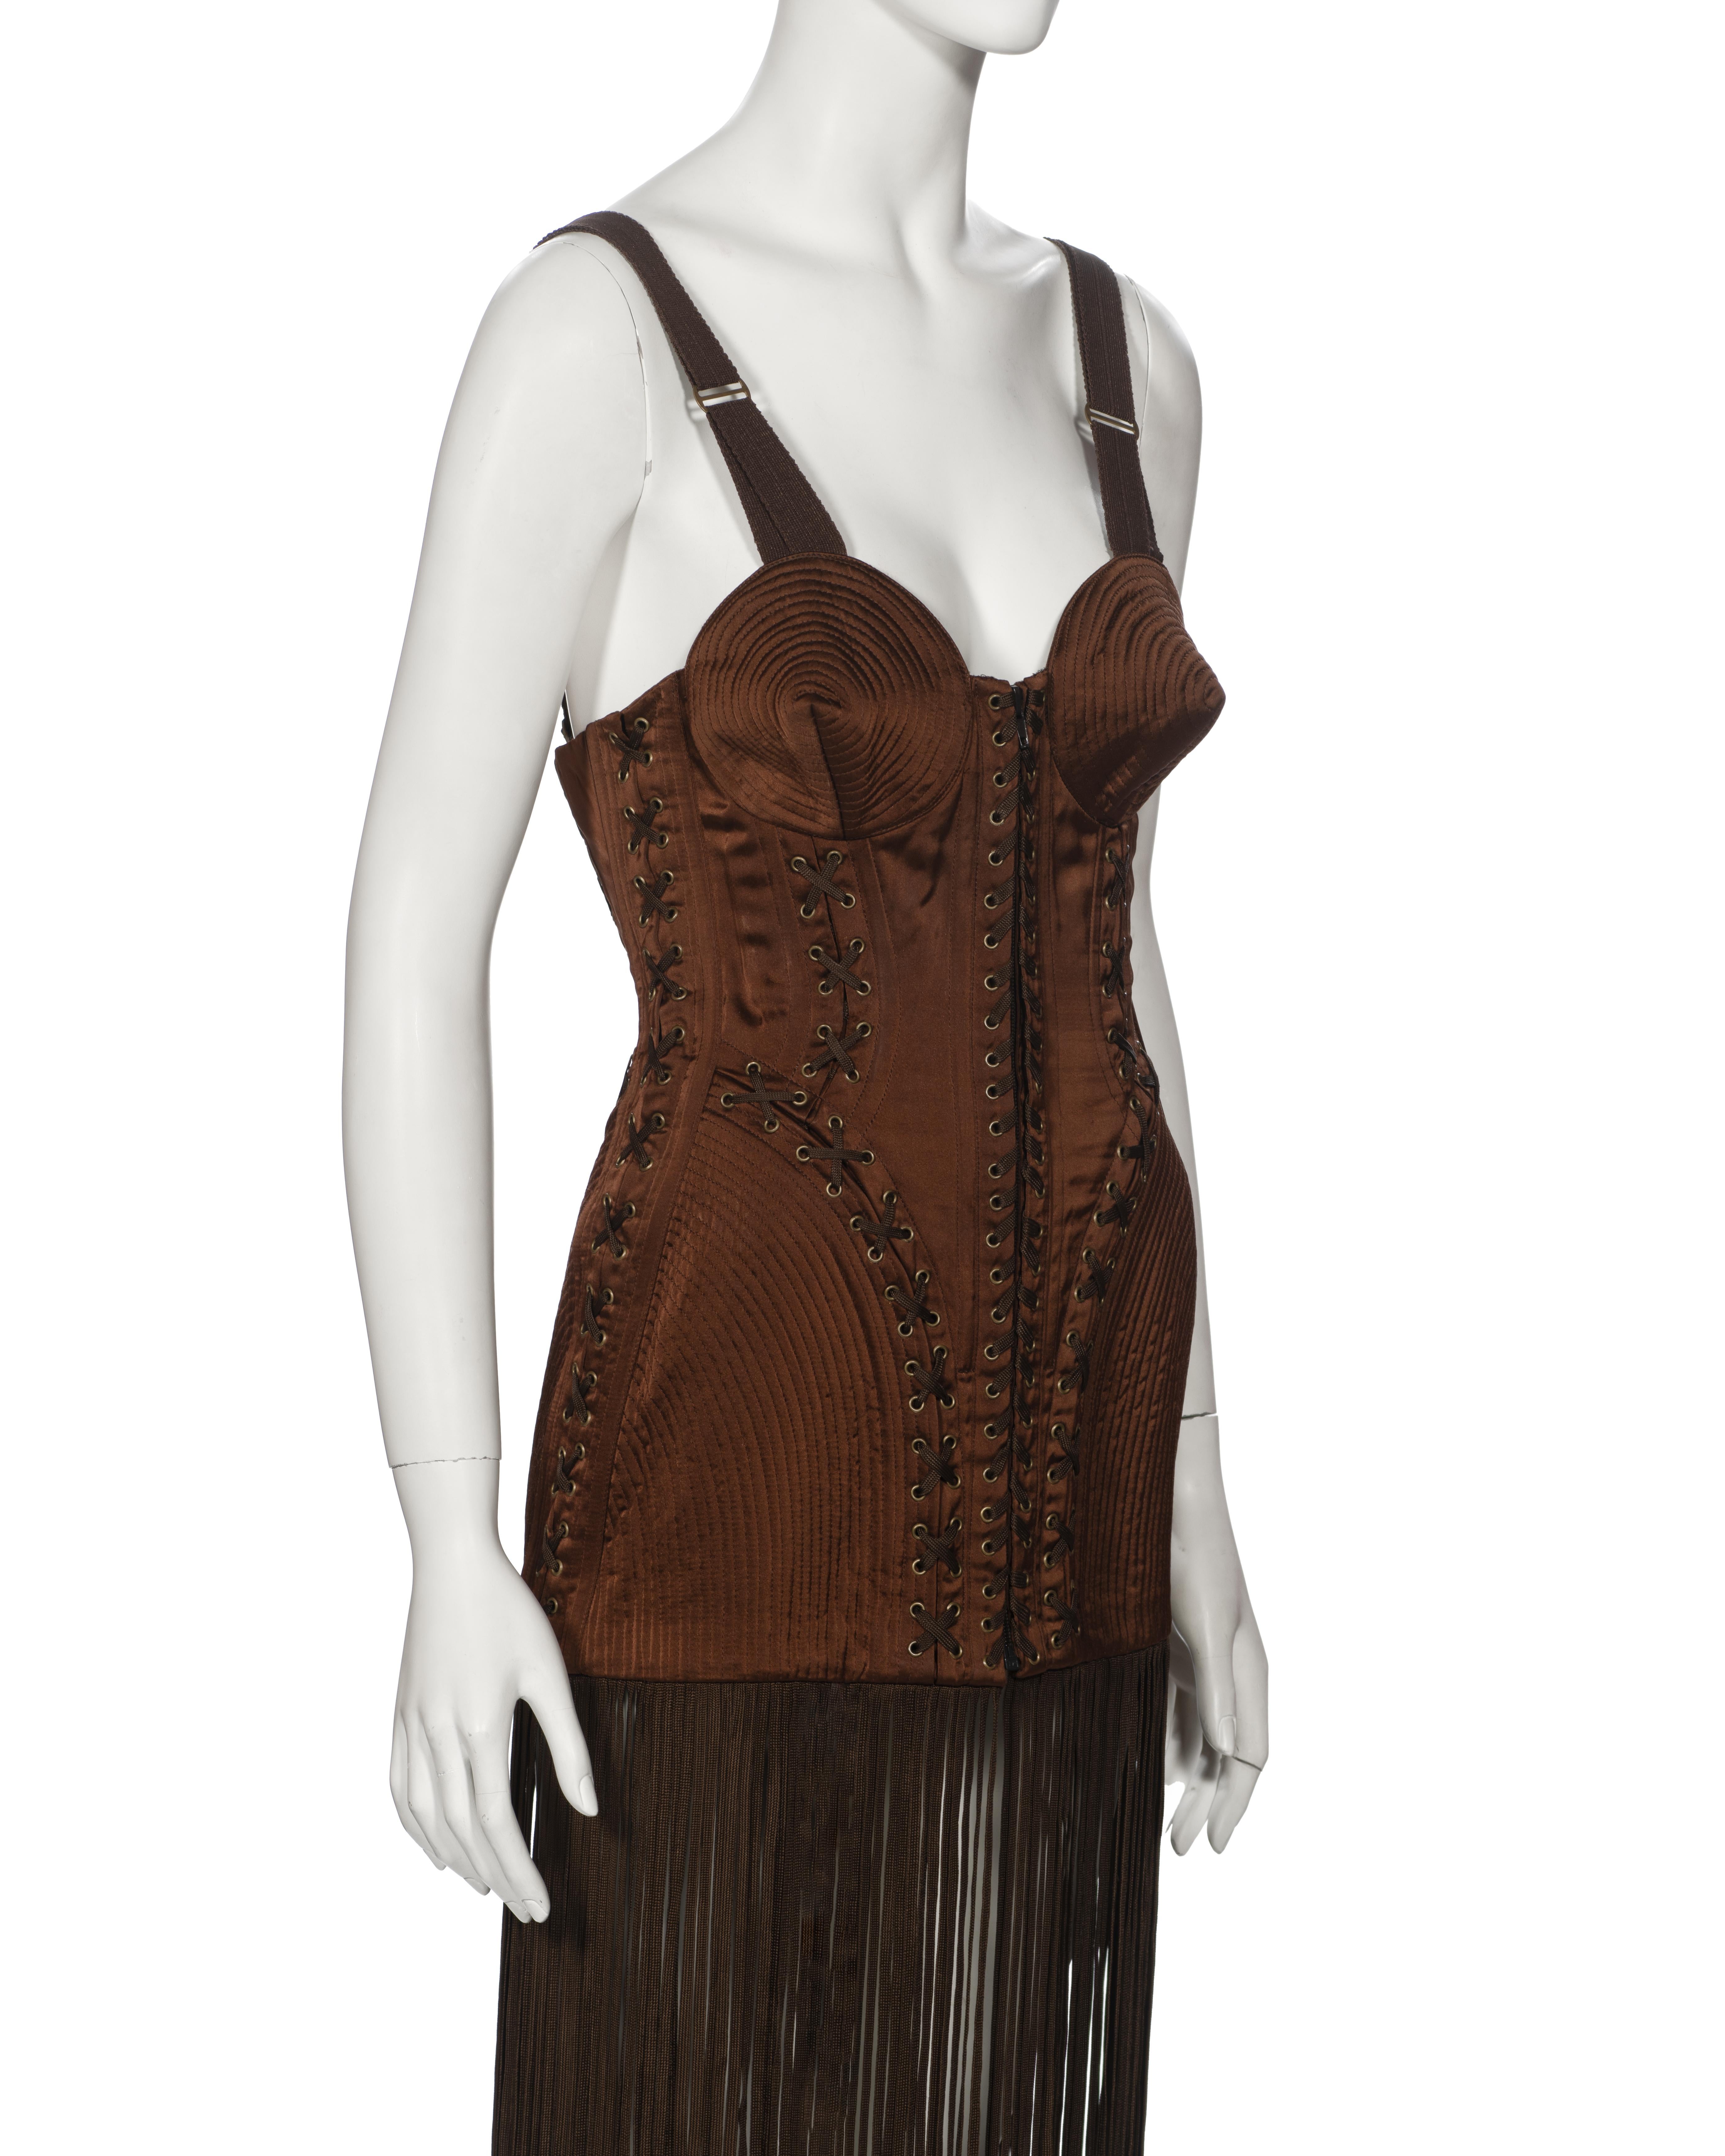 Jean Paul Gaultier Brown Corset Dress with Cone Bra and Fringed Hem, fw 1990 For Sale 5